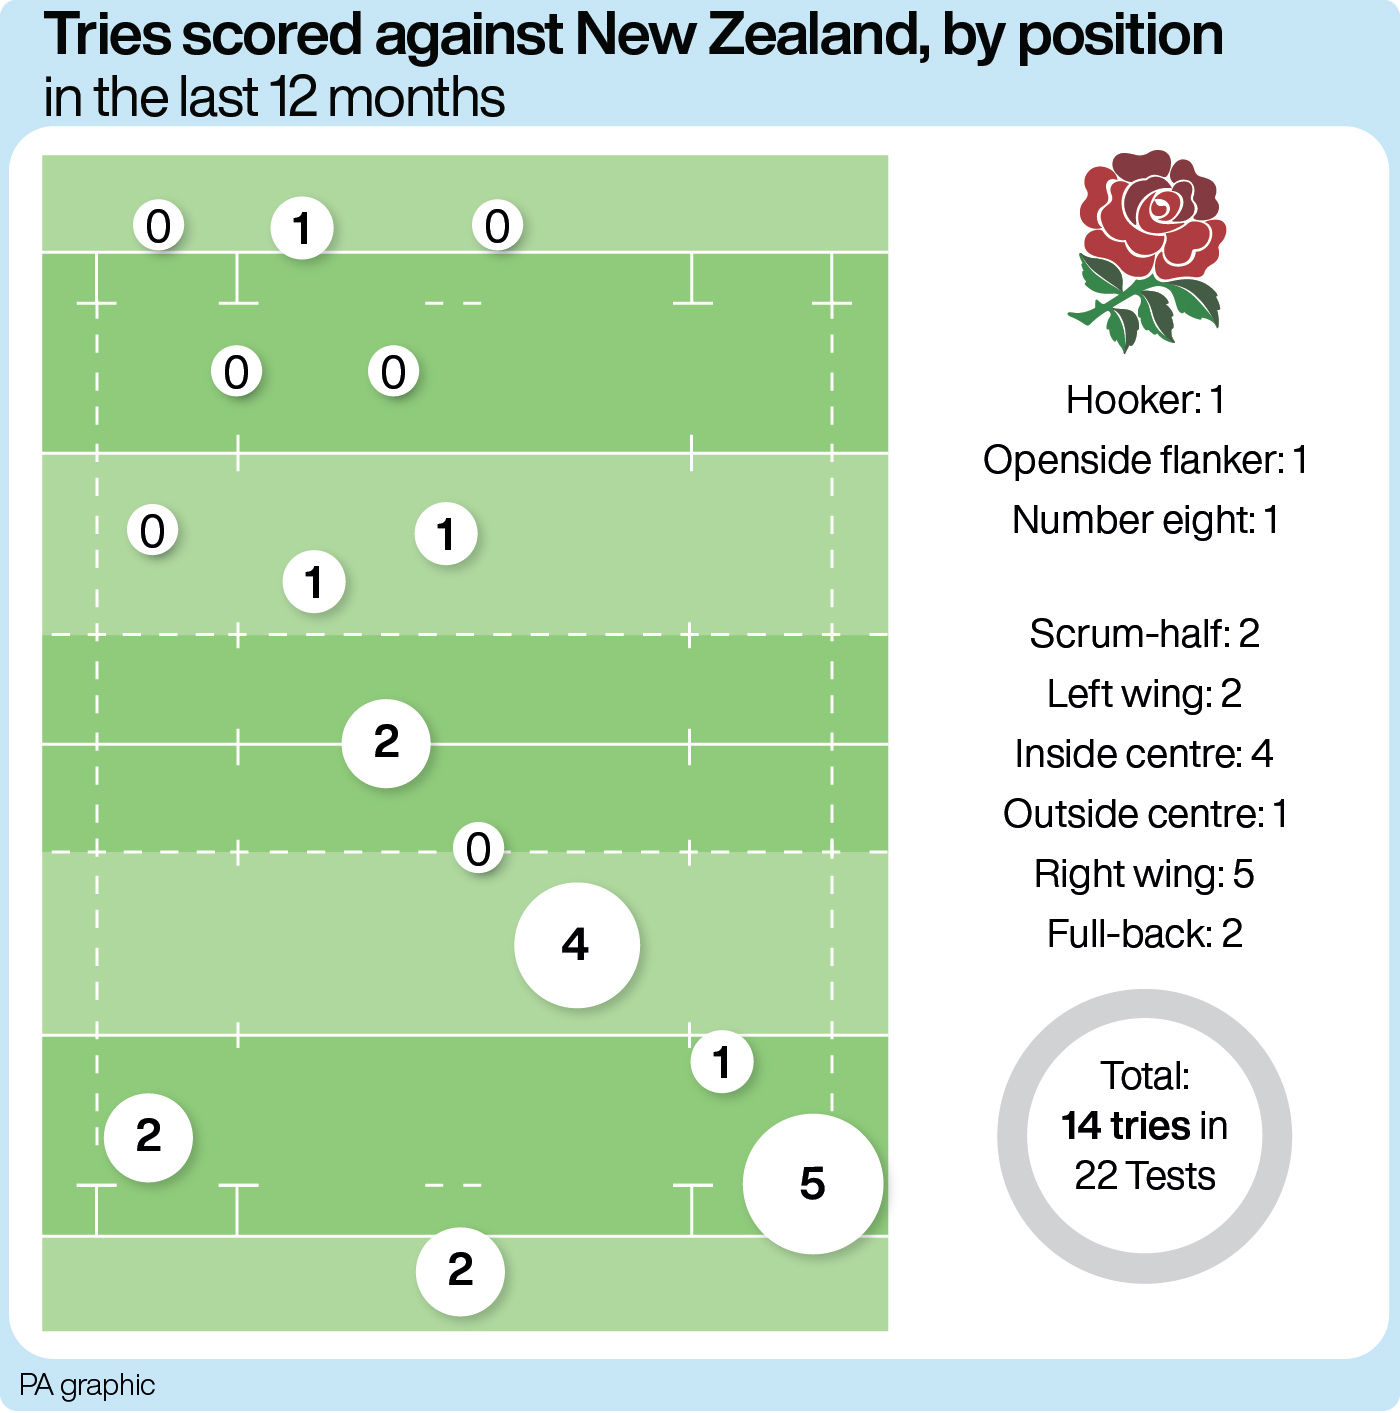 New Zealand have conceded more tries to right wingers than any other player